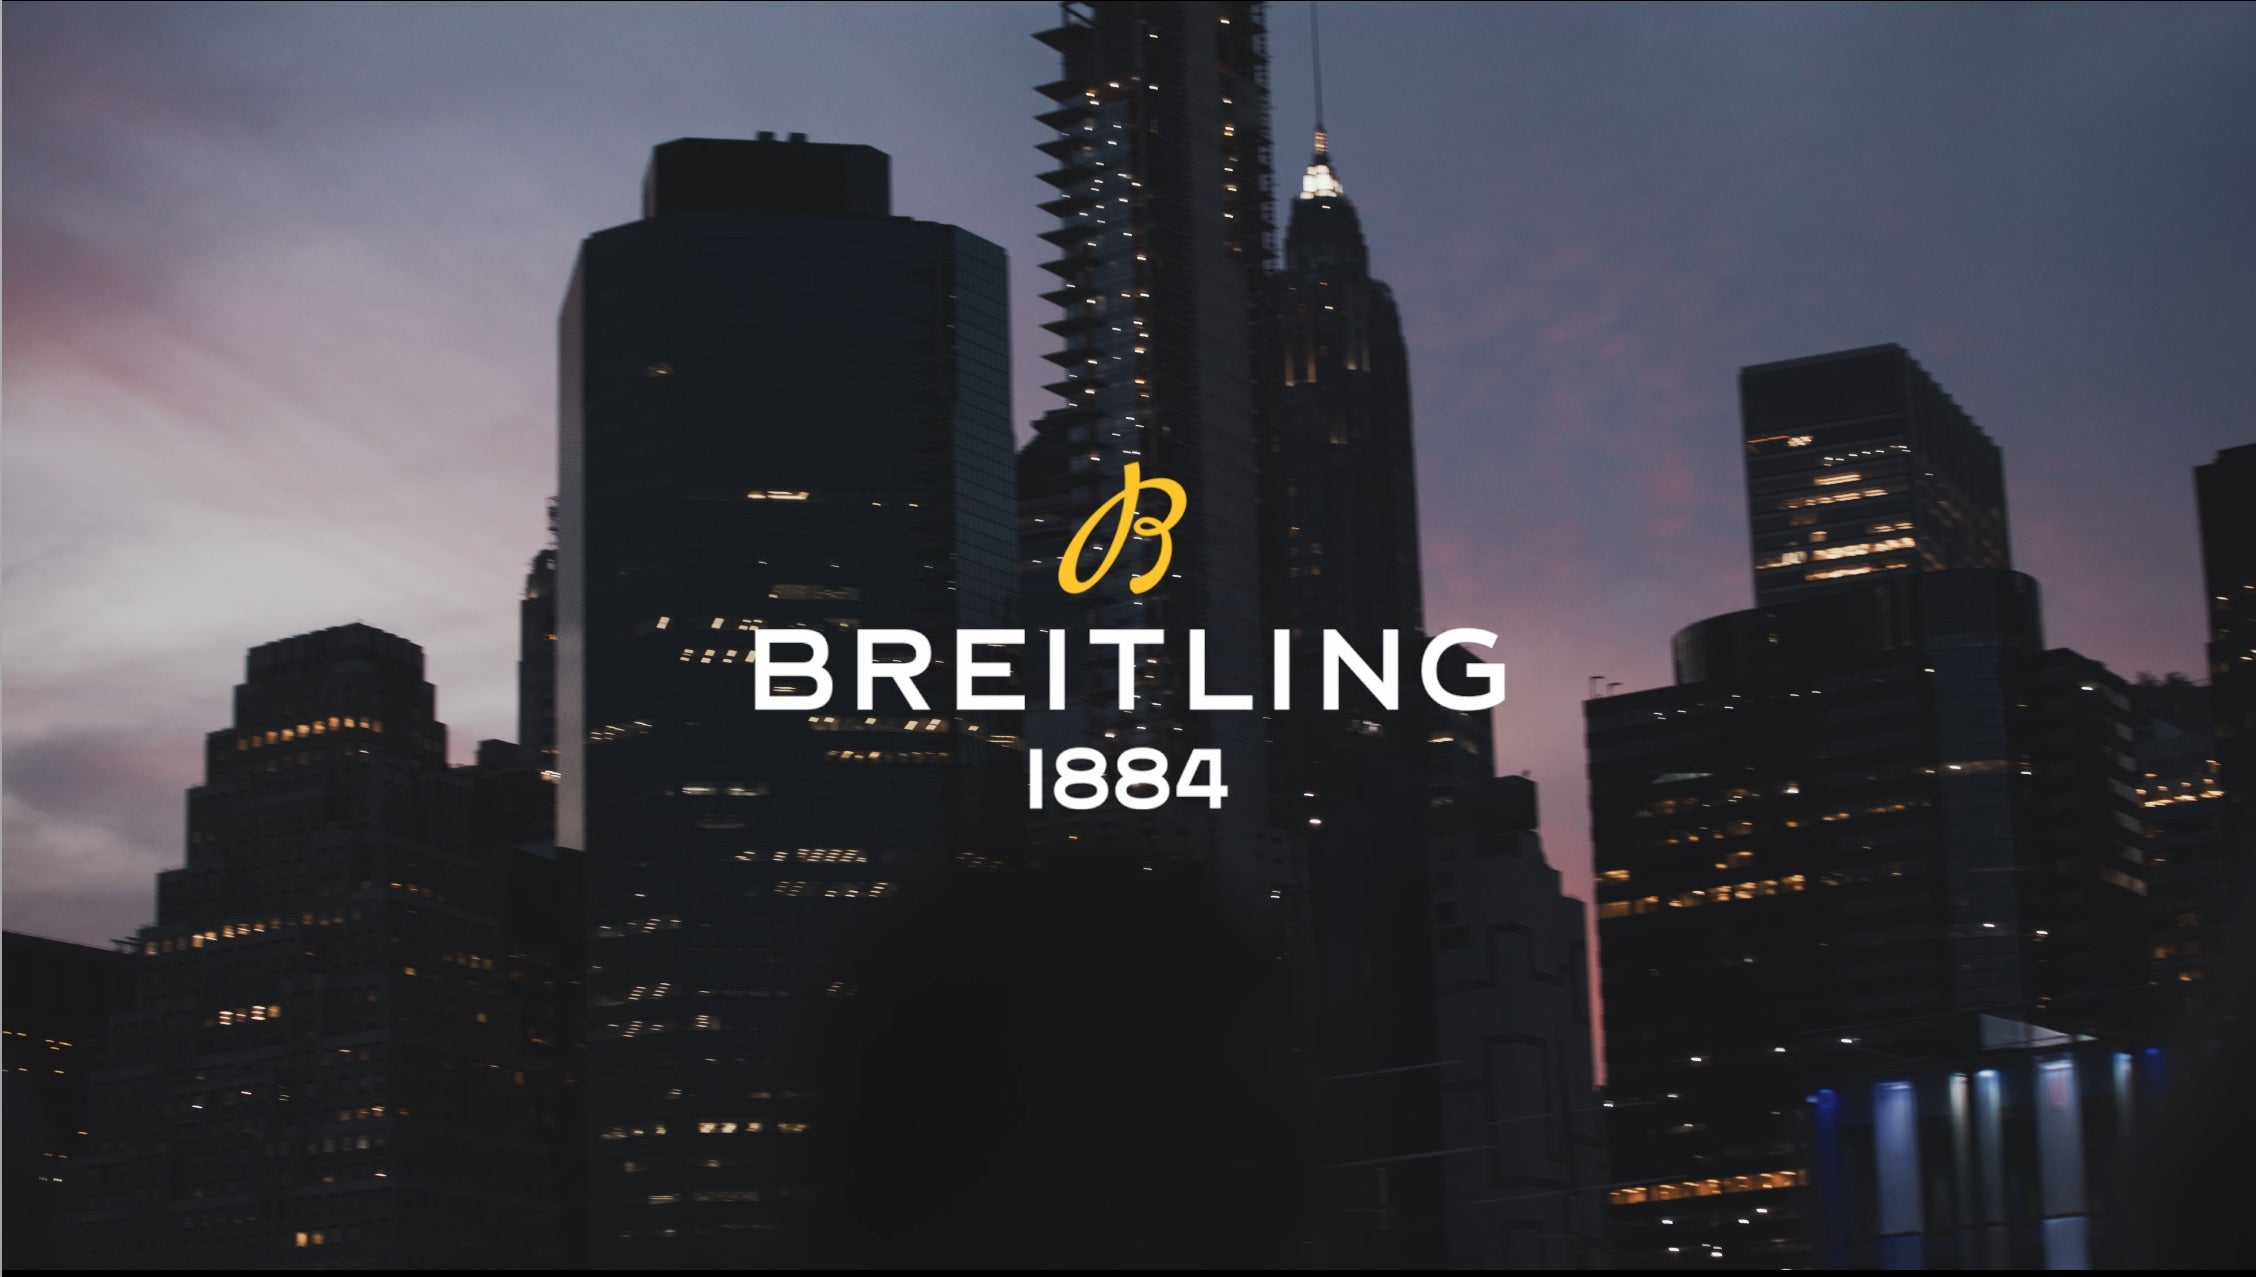 Load video: Breitling Navitimer 32 and Navitmer 36 launch event with Charlize Theron, Misty Copeland and Giannis Antetokounmpo in New York